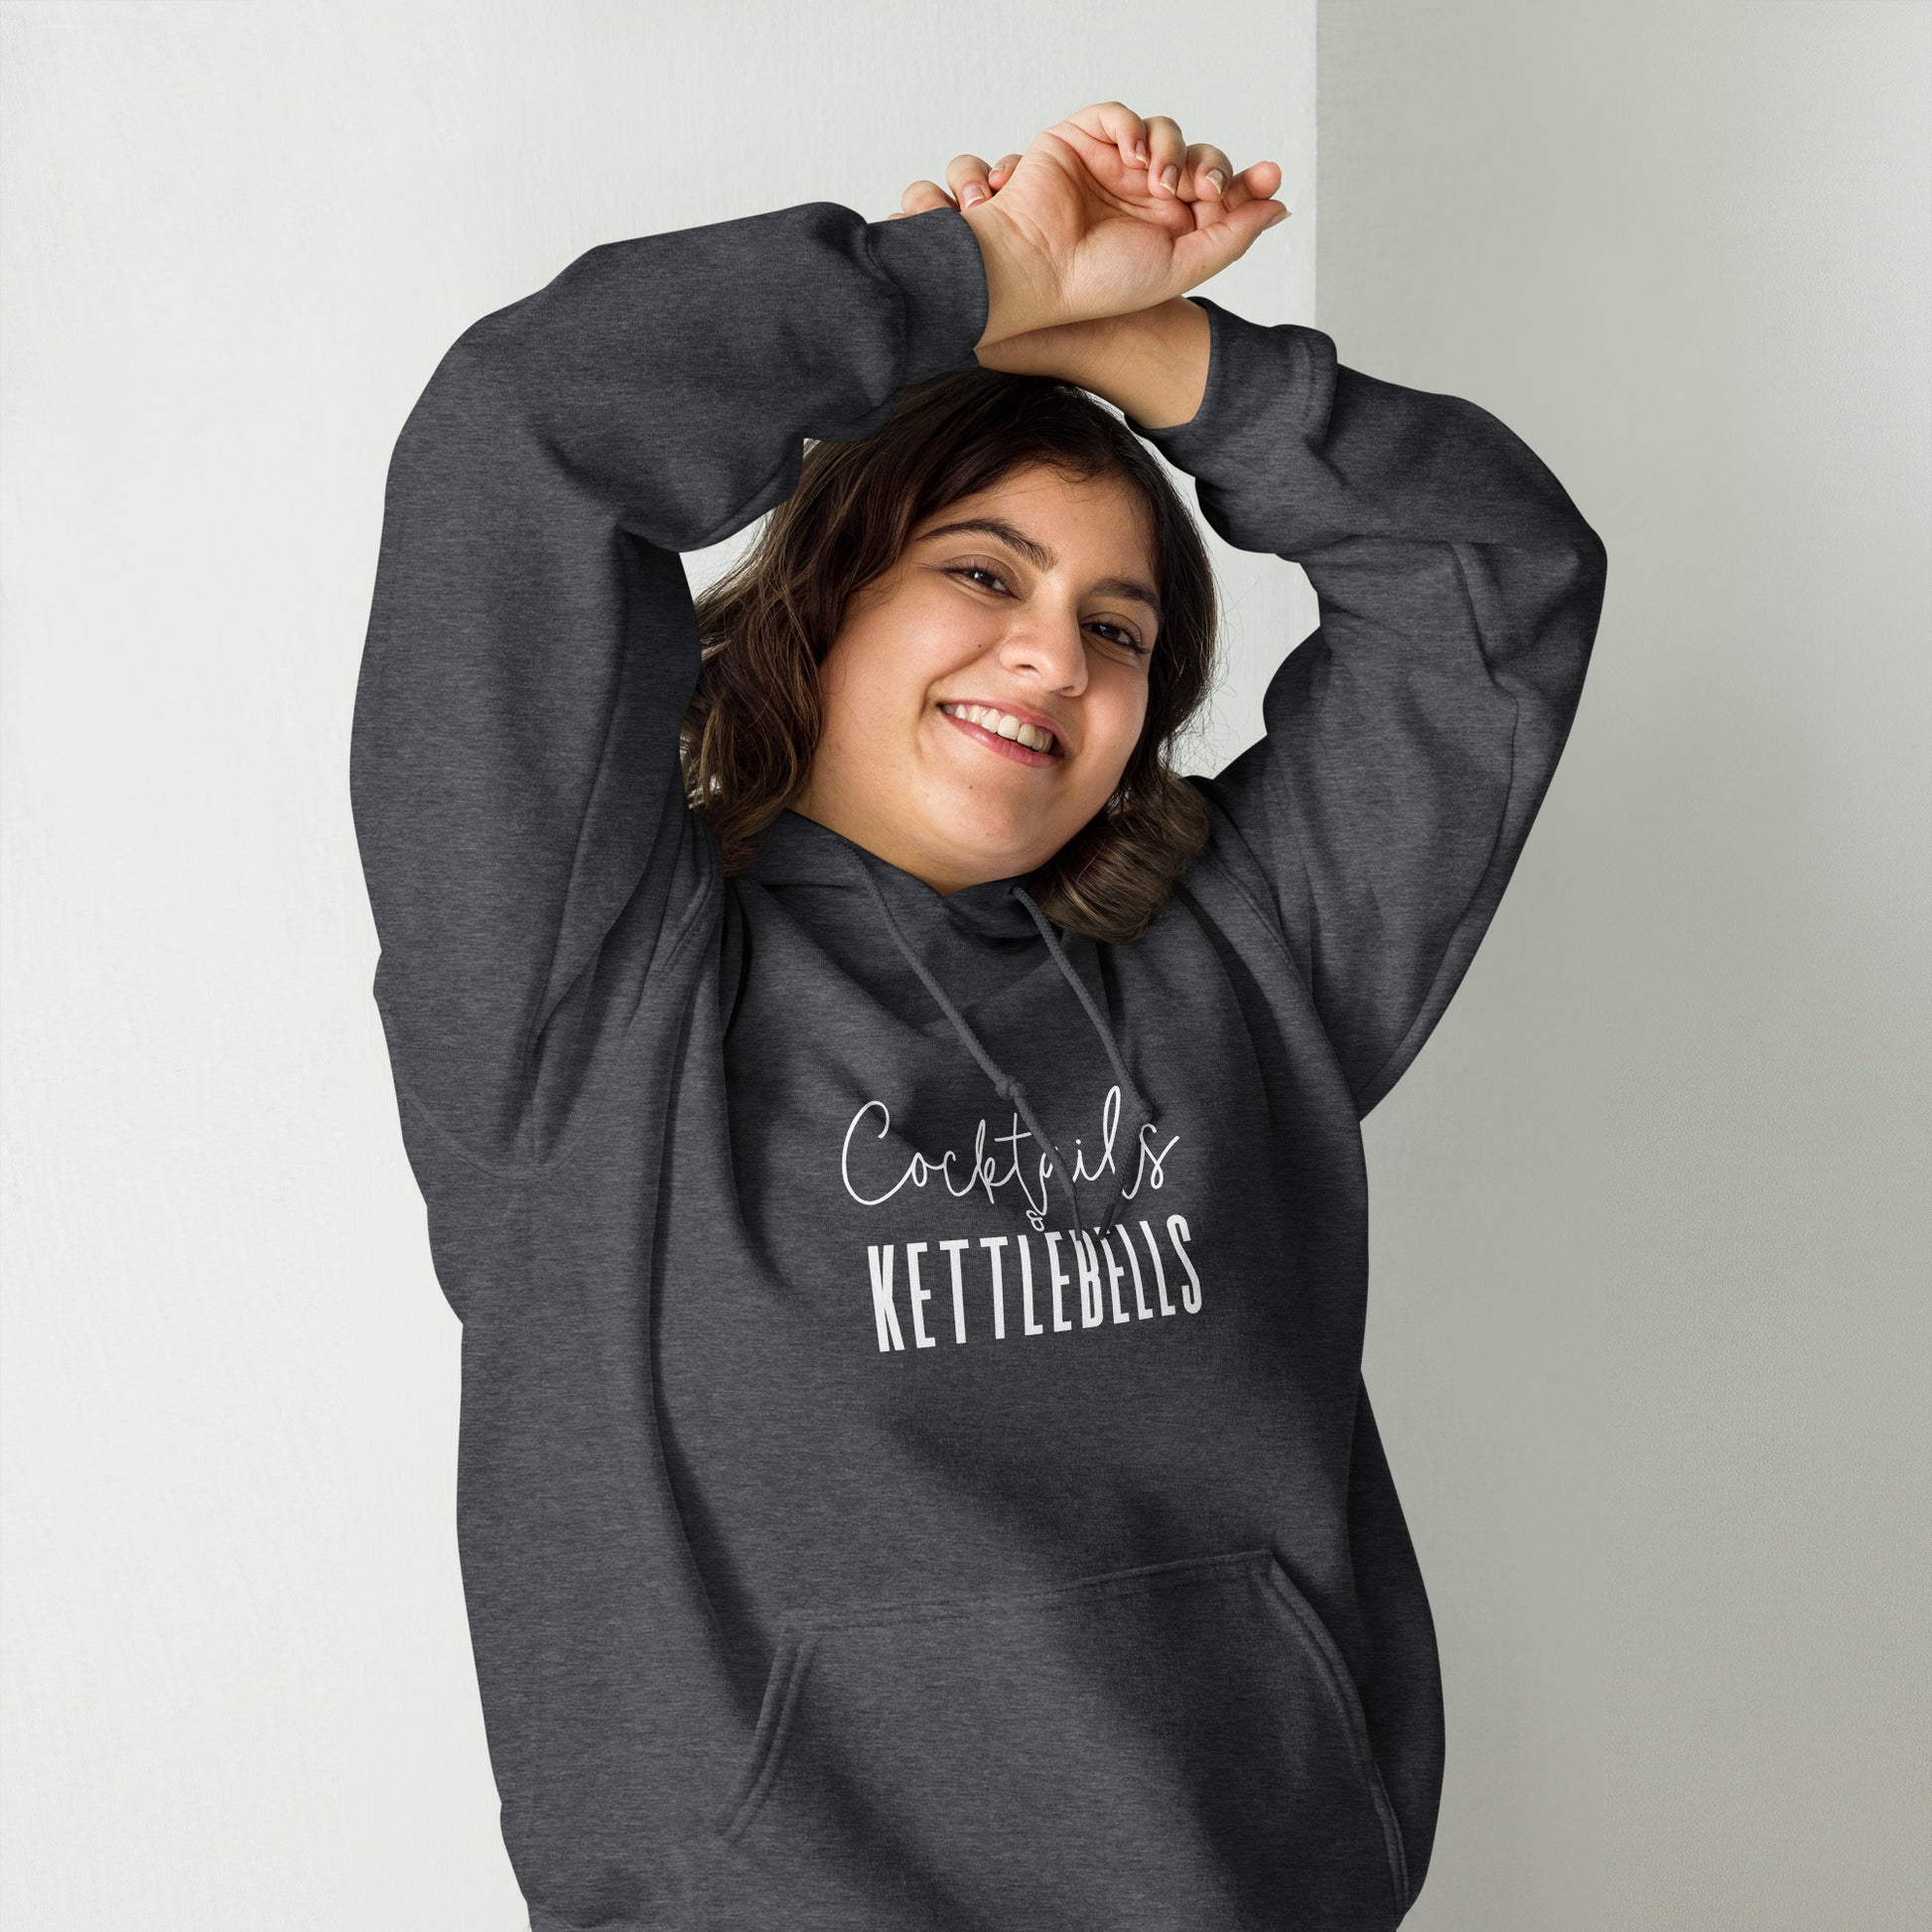 woman wearing a grey hoodie with the words cocktails and kettlebells in a white font across the chest